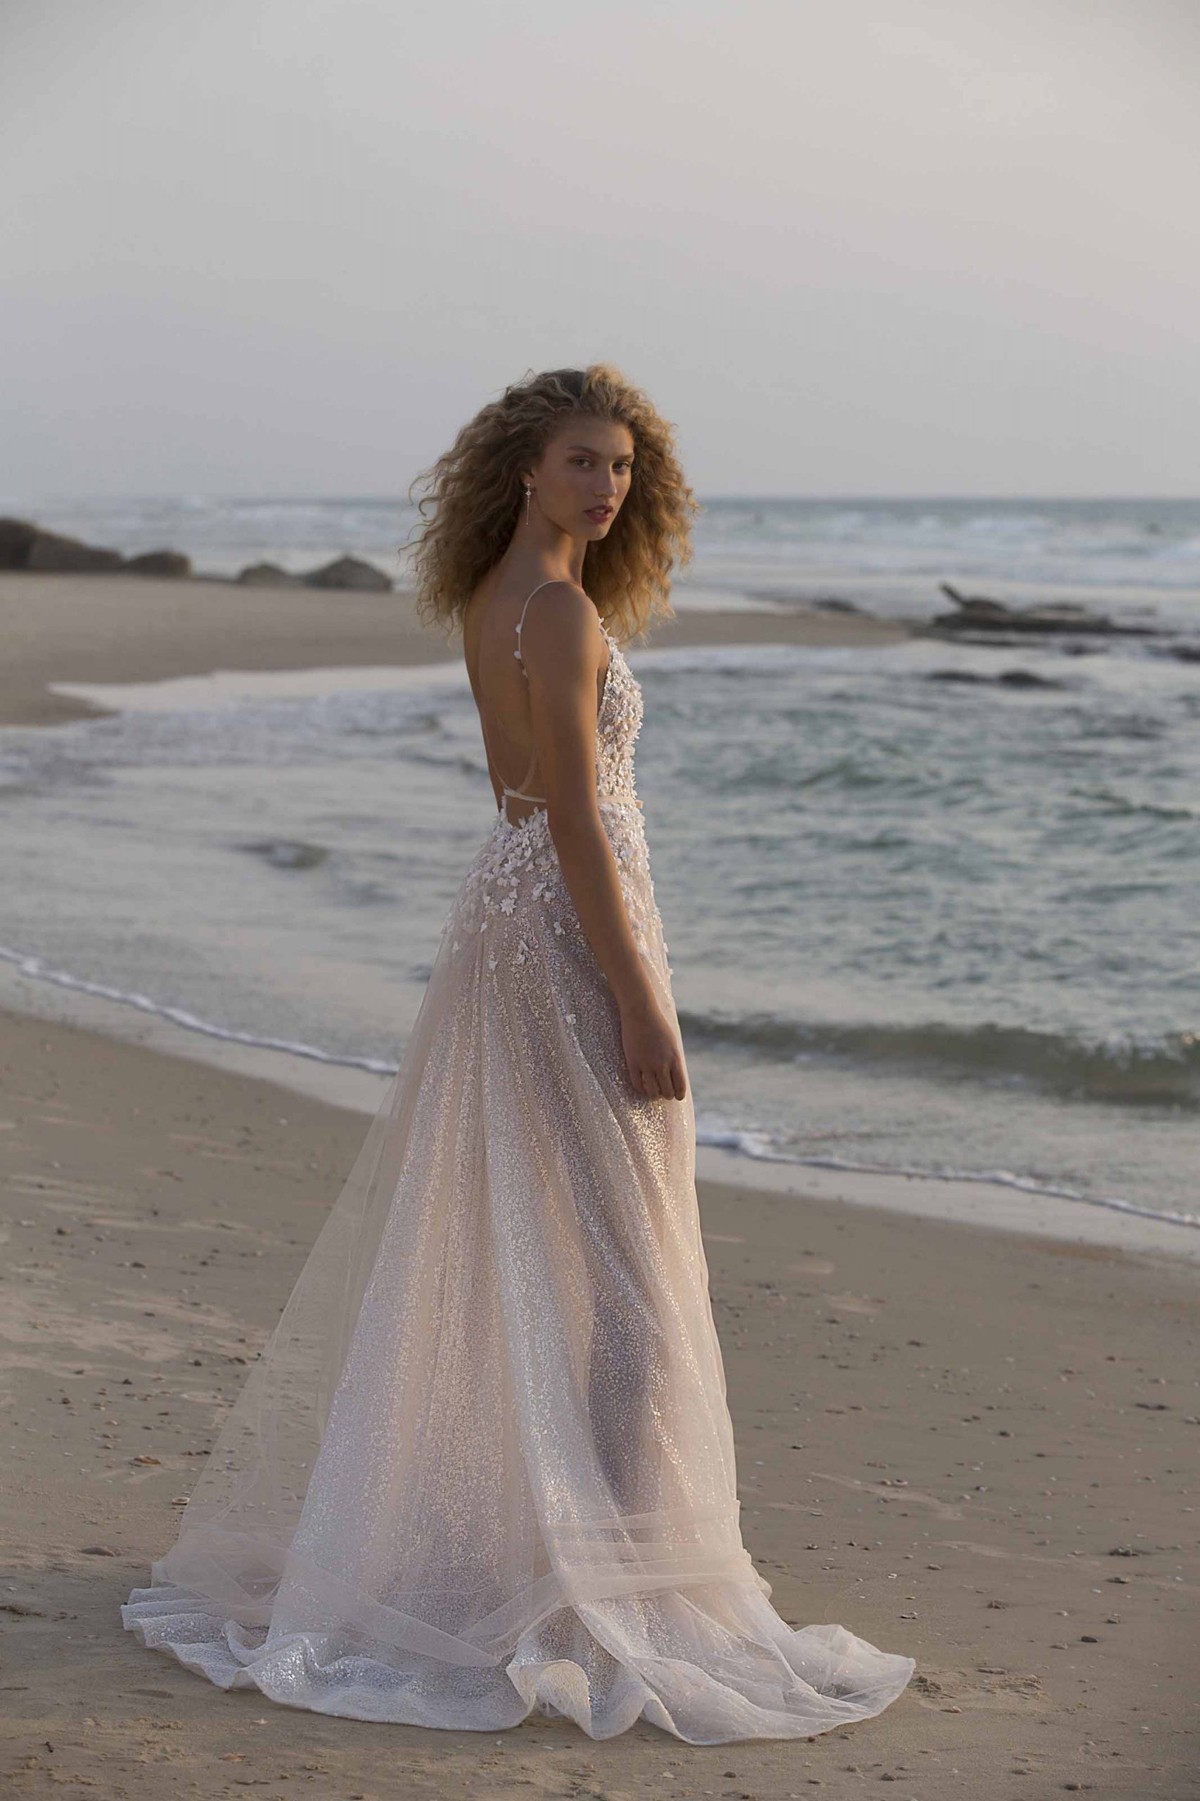 21-HOLLIE Bridal Dress Inspirated By Berta Muse 2021 Vista Mare Collection